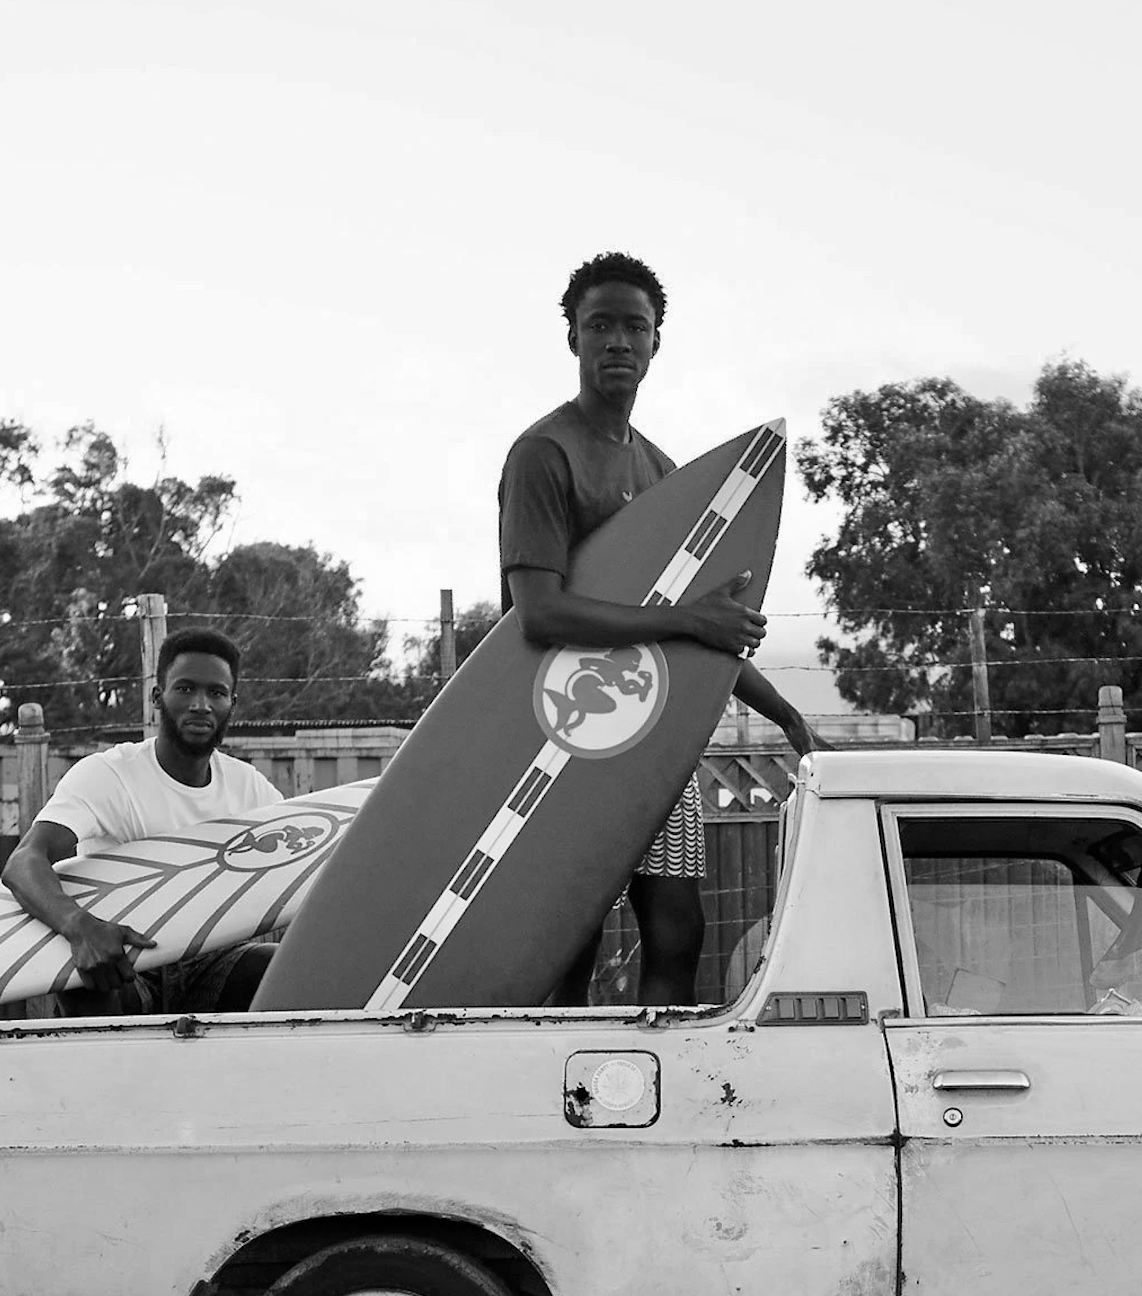 WAVES OF INTENTION: HOW MAMI WATA IS BRINGING AFRICAN SURF CULTURES TO THE WORLD